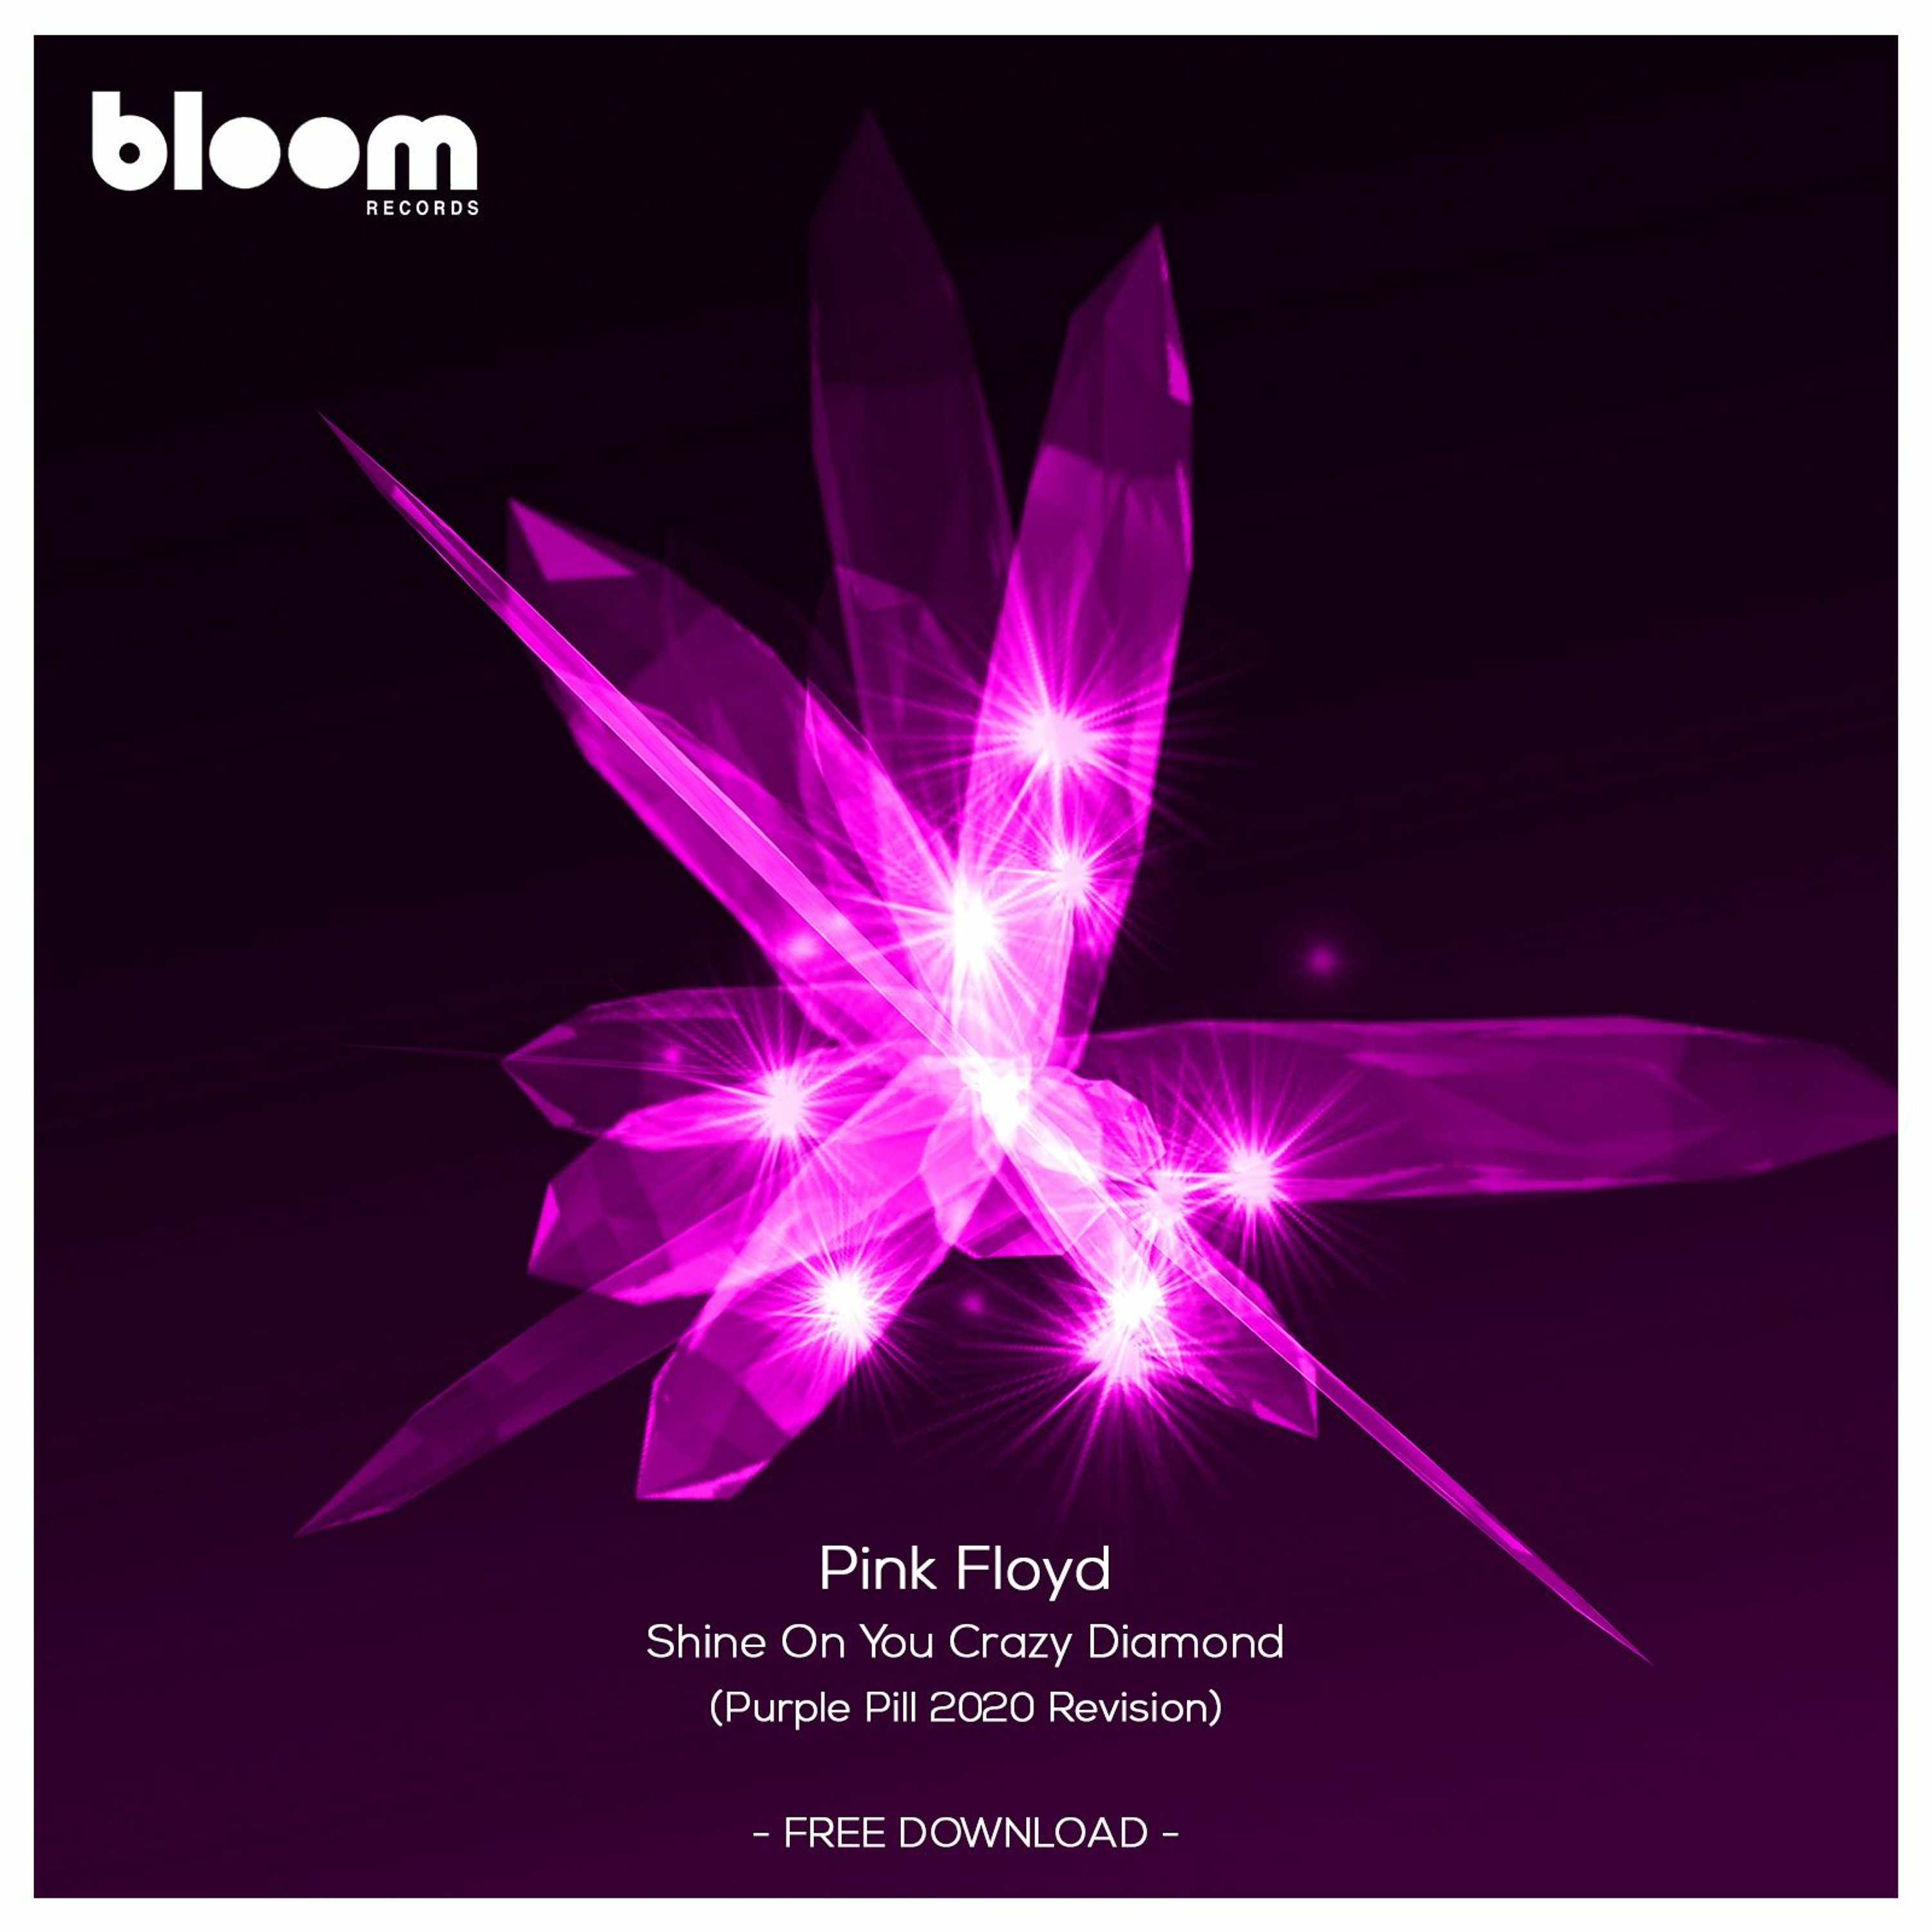 FREE DOWNLOAD: Pink Floyd - Shine On You Crazy Diamond ( Purple Pill Edit )  by BLOOM RECORDS PODCAST | Podchaser